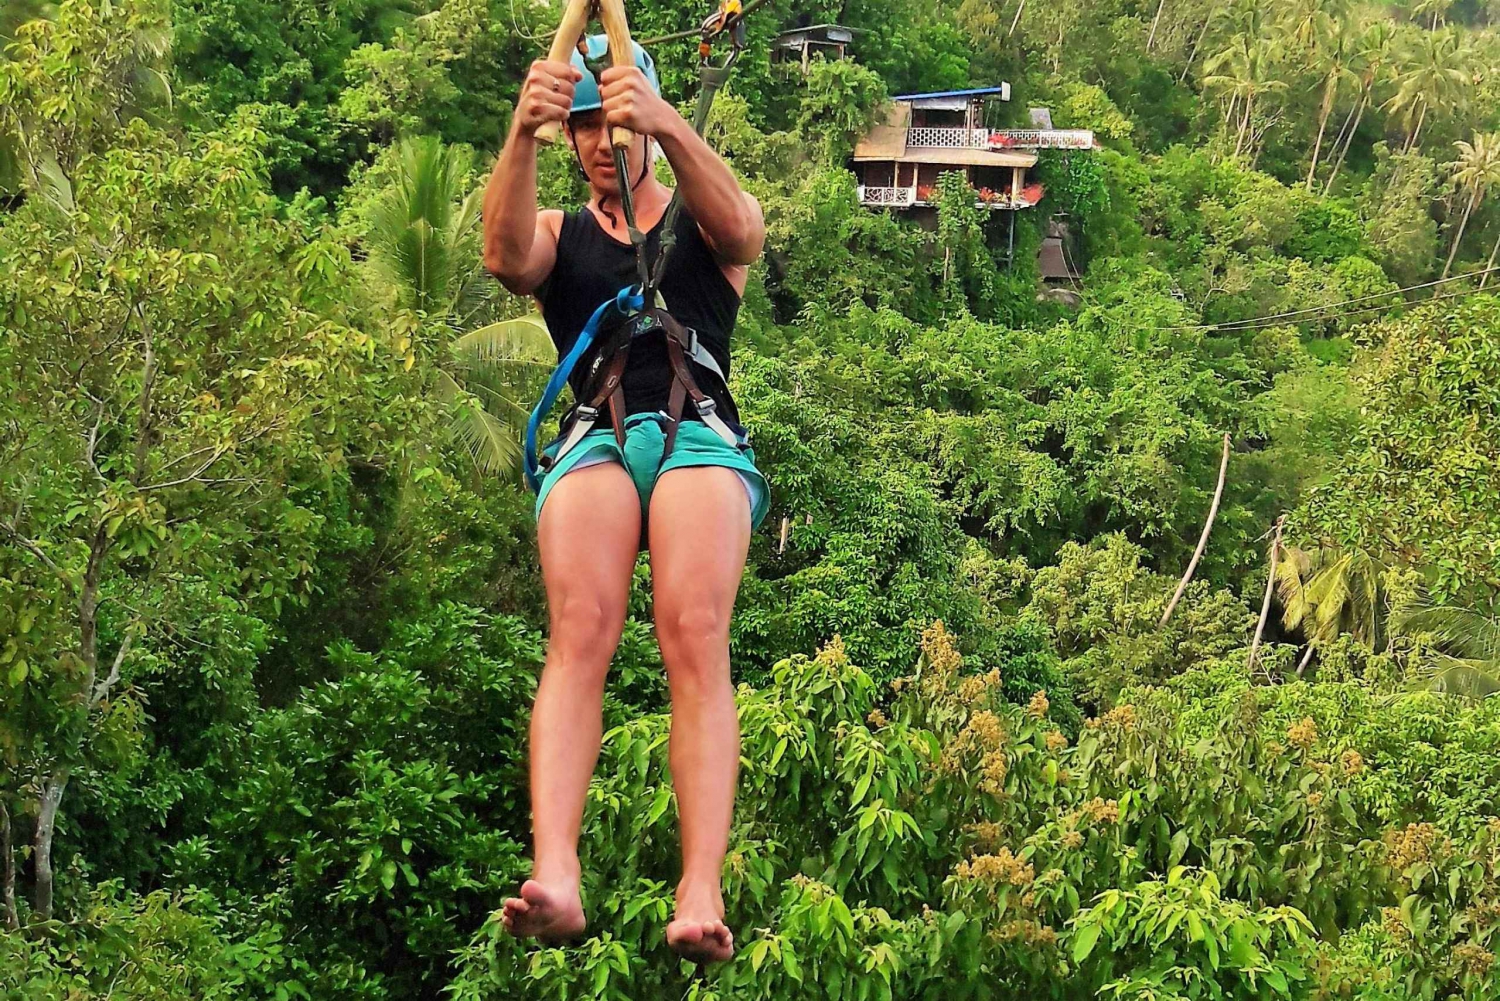 The one and only Zipline Experience of Lamai Viewpoint